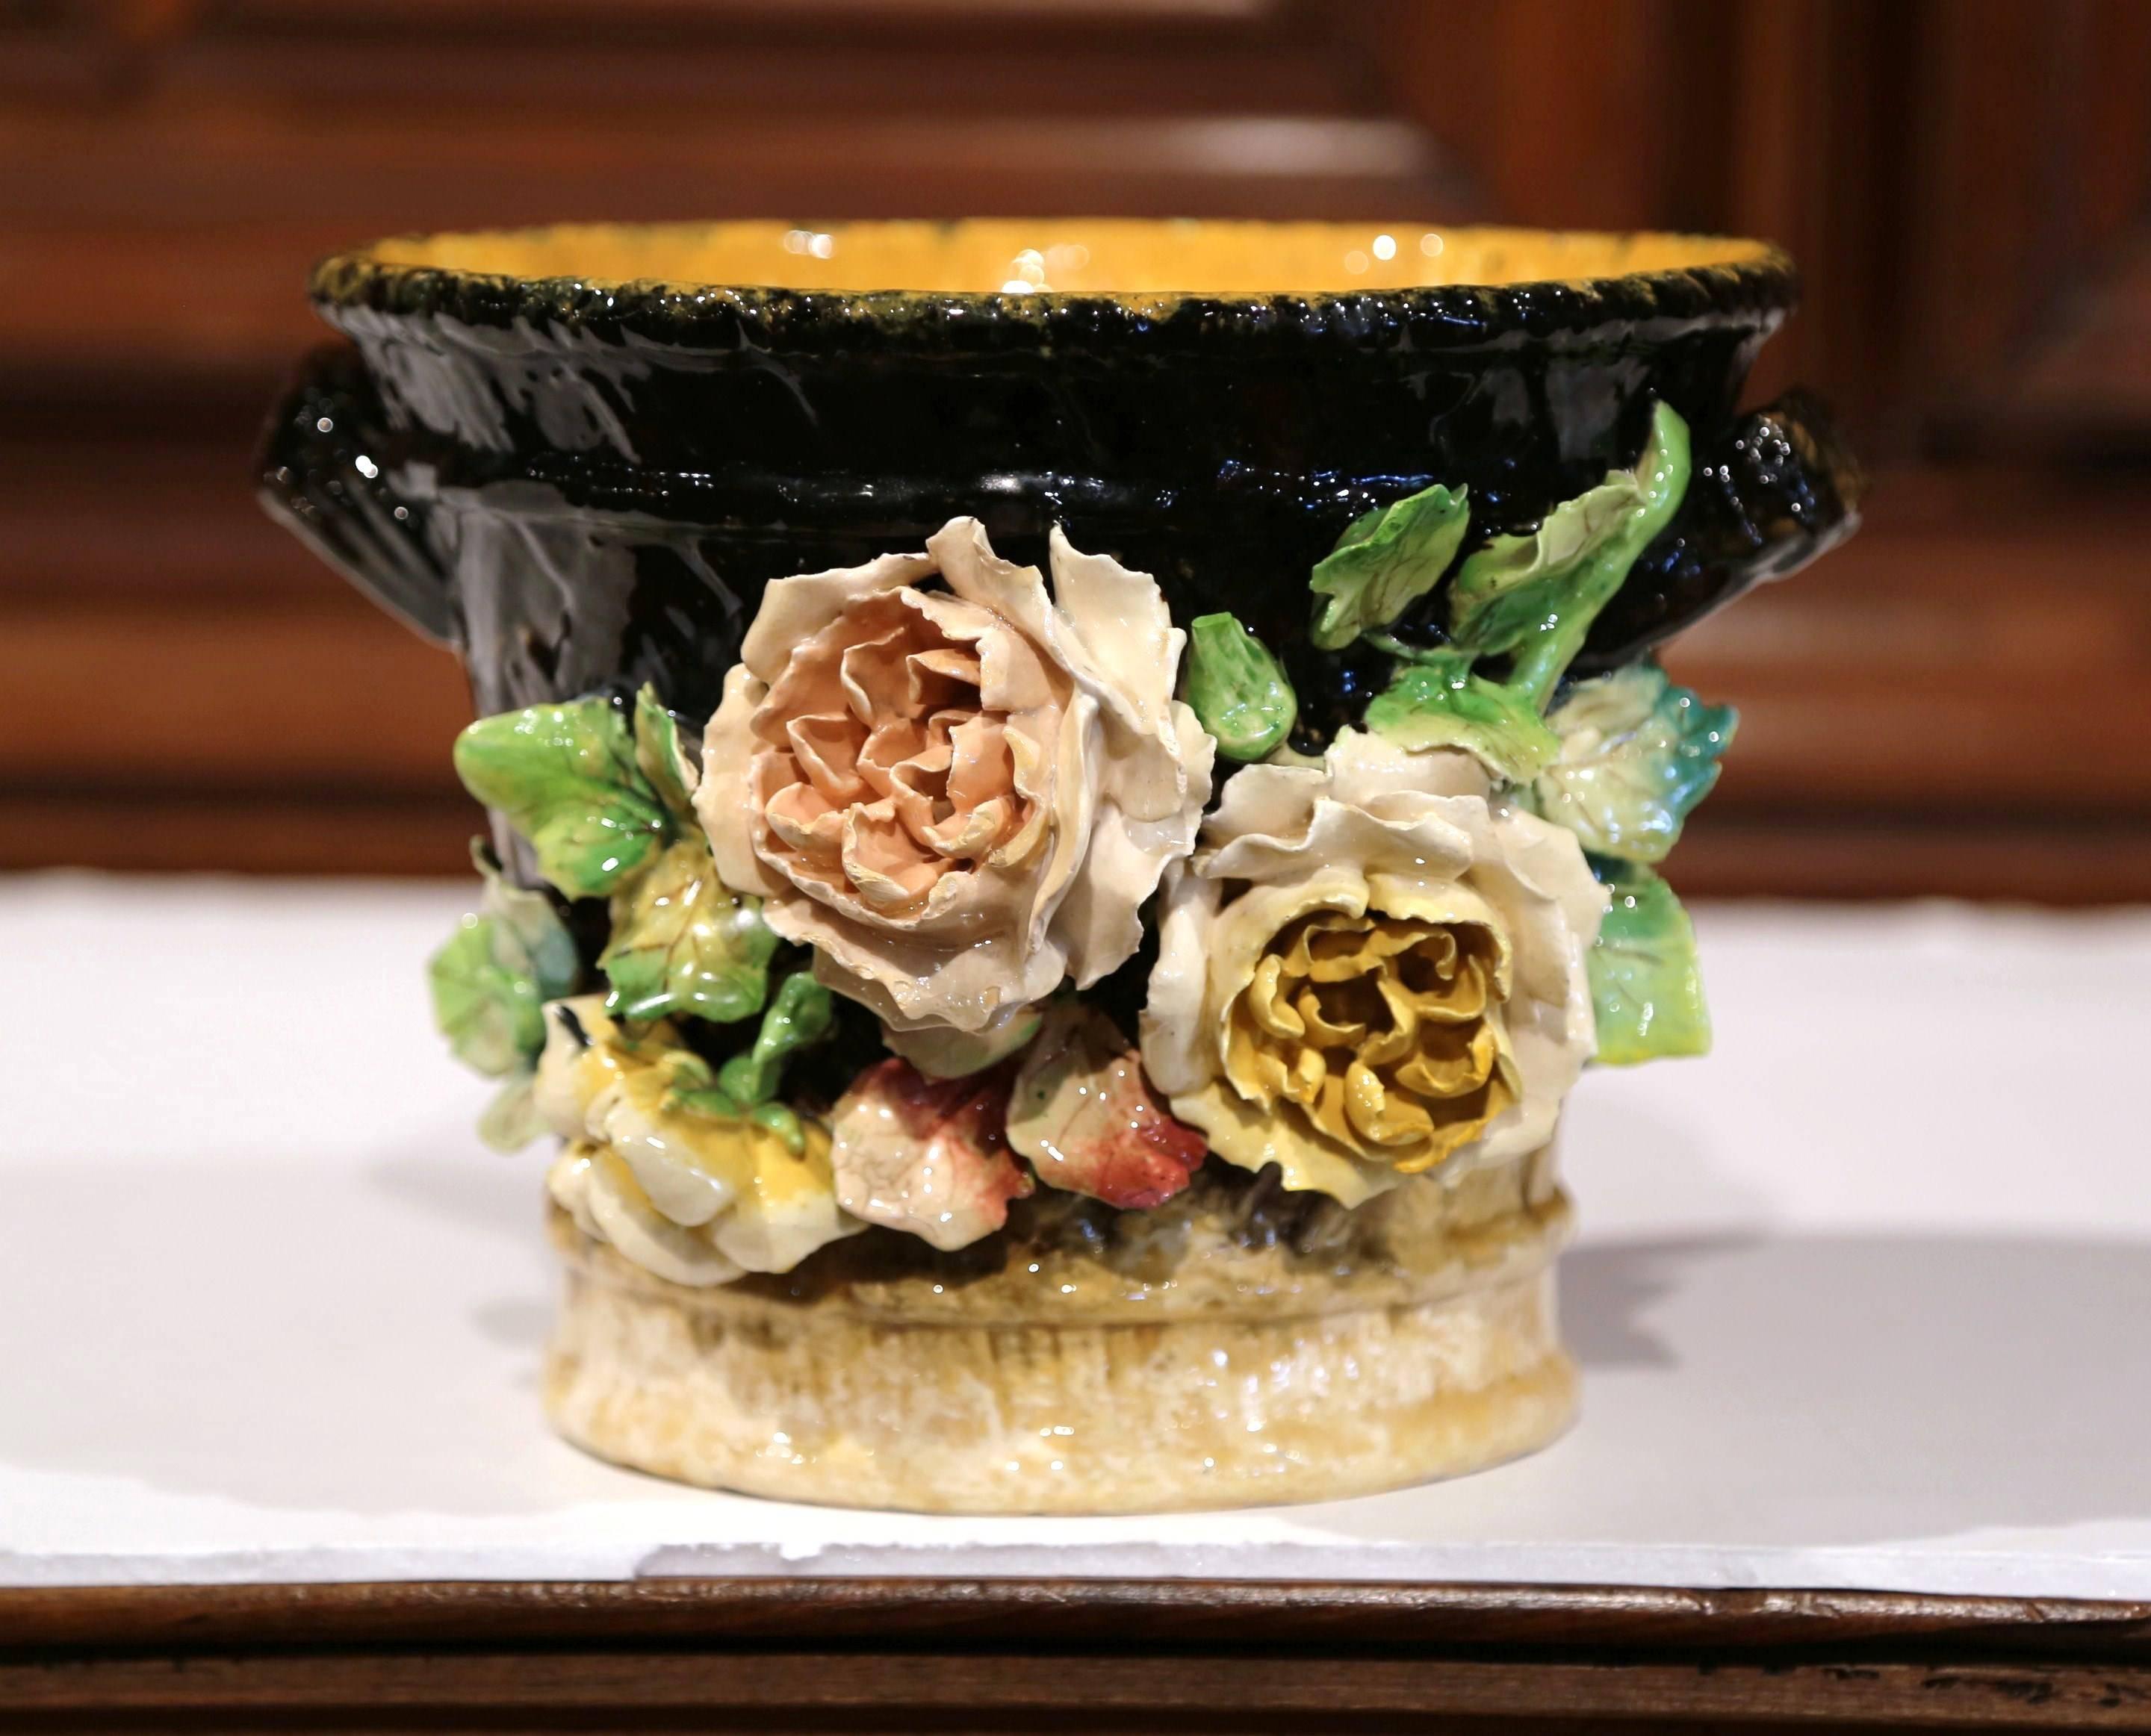 This beautiful, hand-painted majolica planter was sculpted in Montigny sur Loing, France, circa 1870. This colorful brown and yellow cache pot has a traditional, textured weave design and is embellished with large, high relief roses and flowers in a